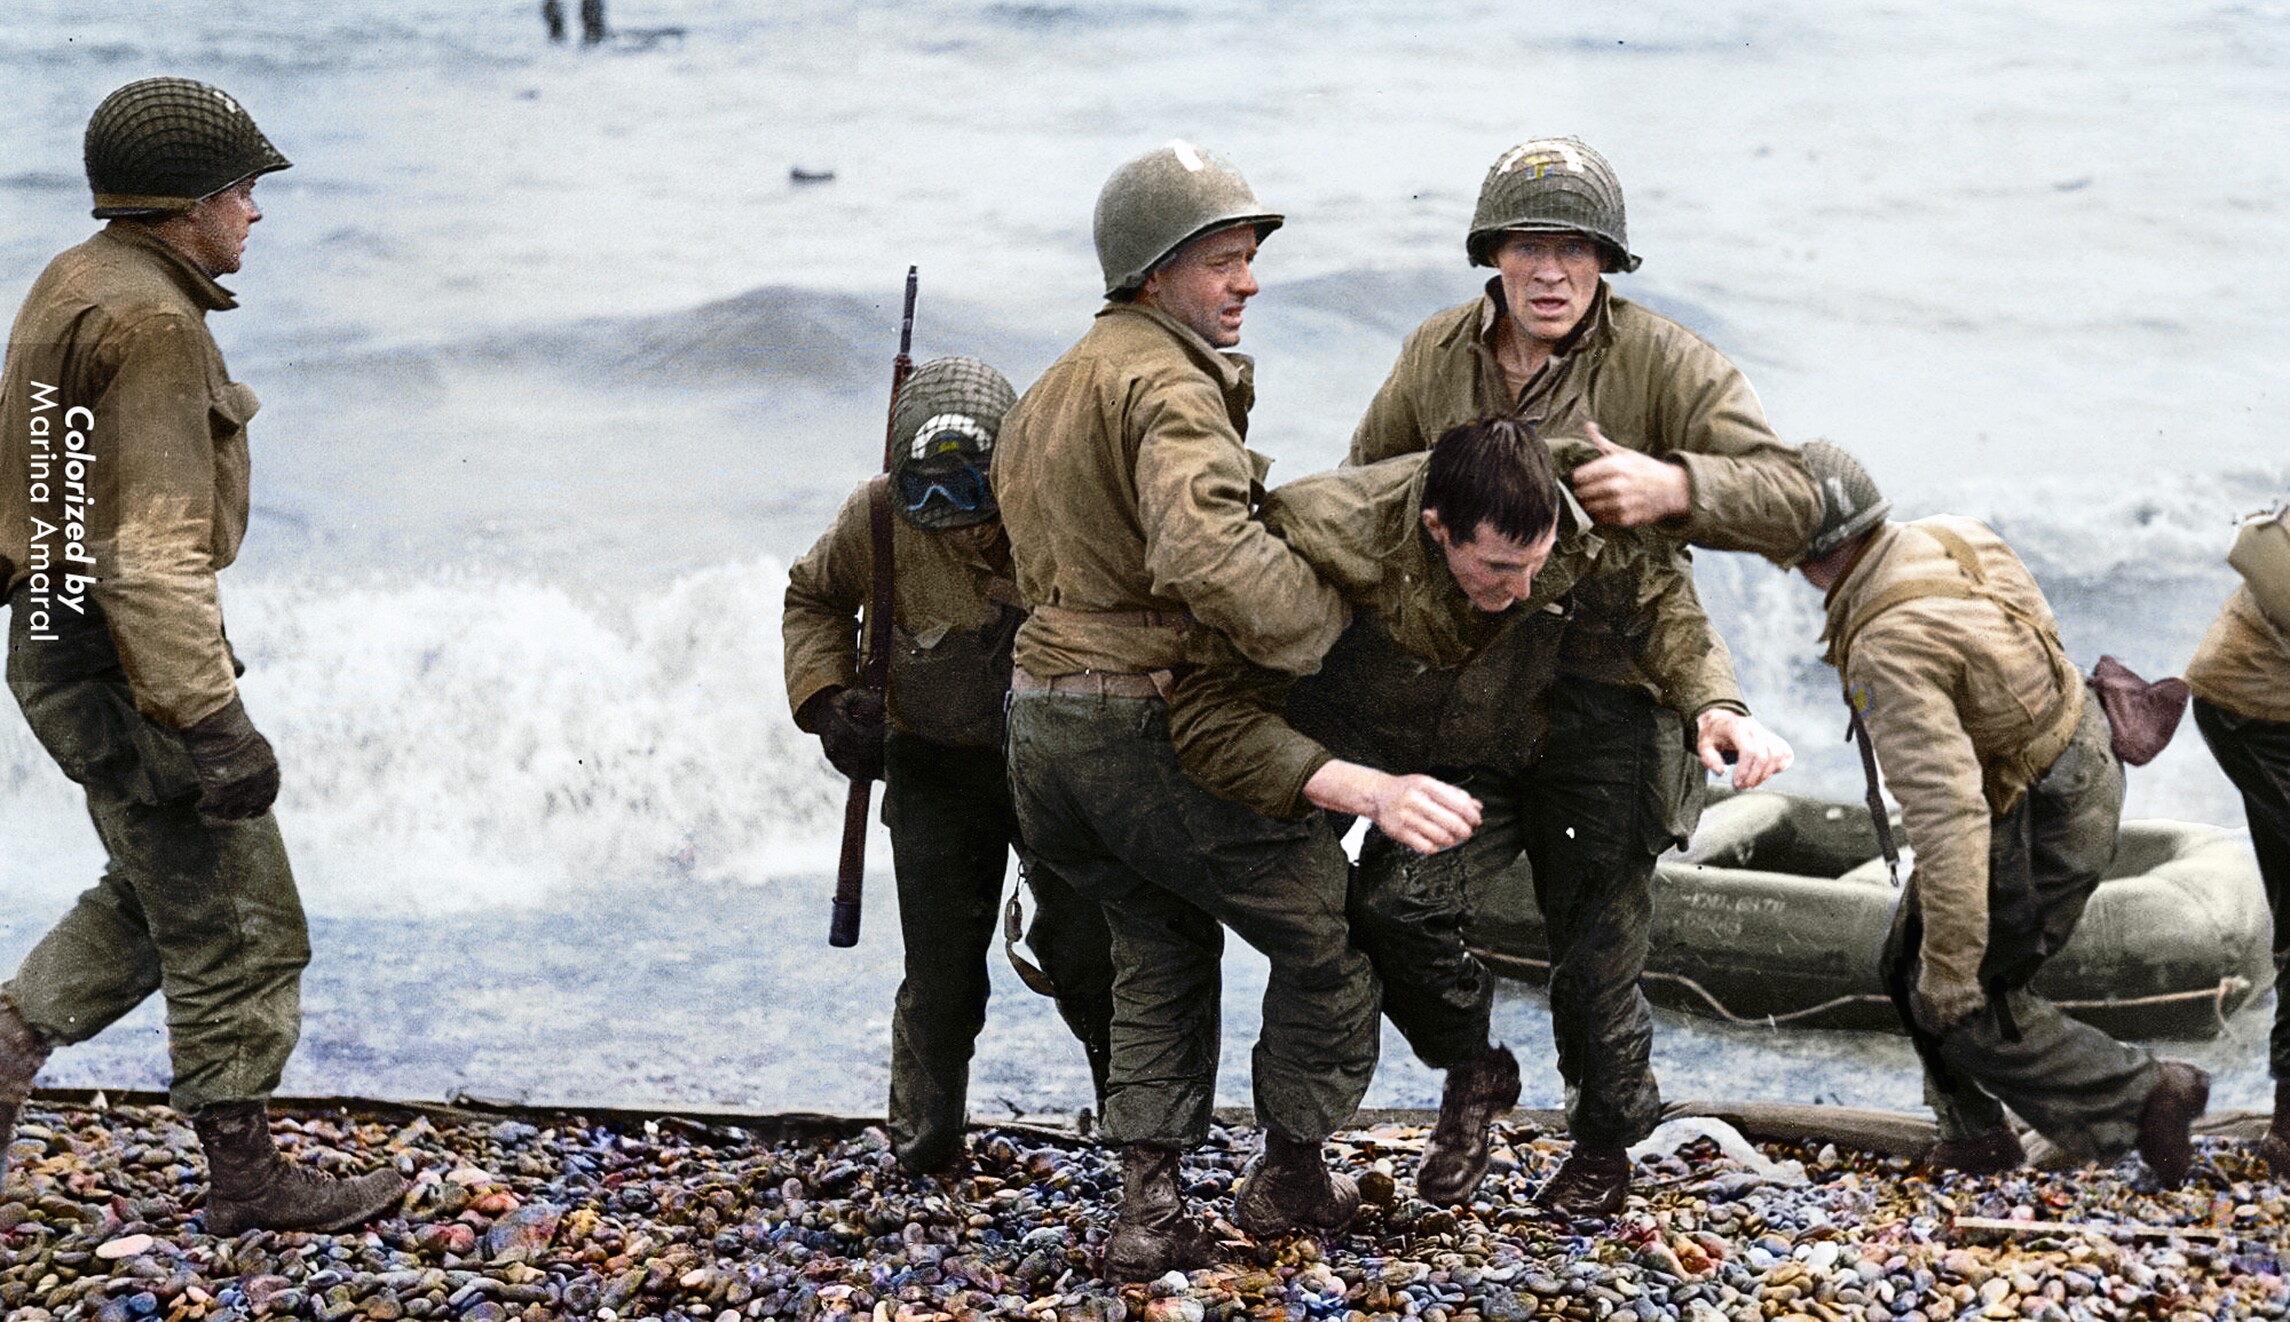 D-Day 1944 Photos - d day photos color - Colorized by Marina Amaral